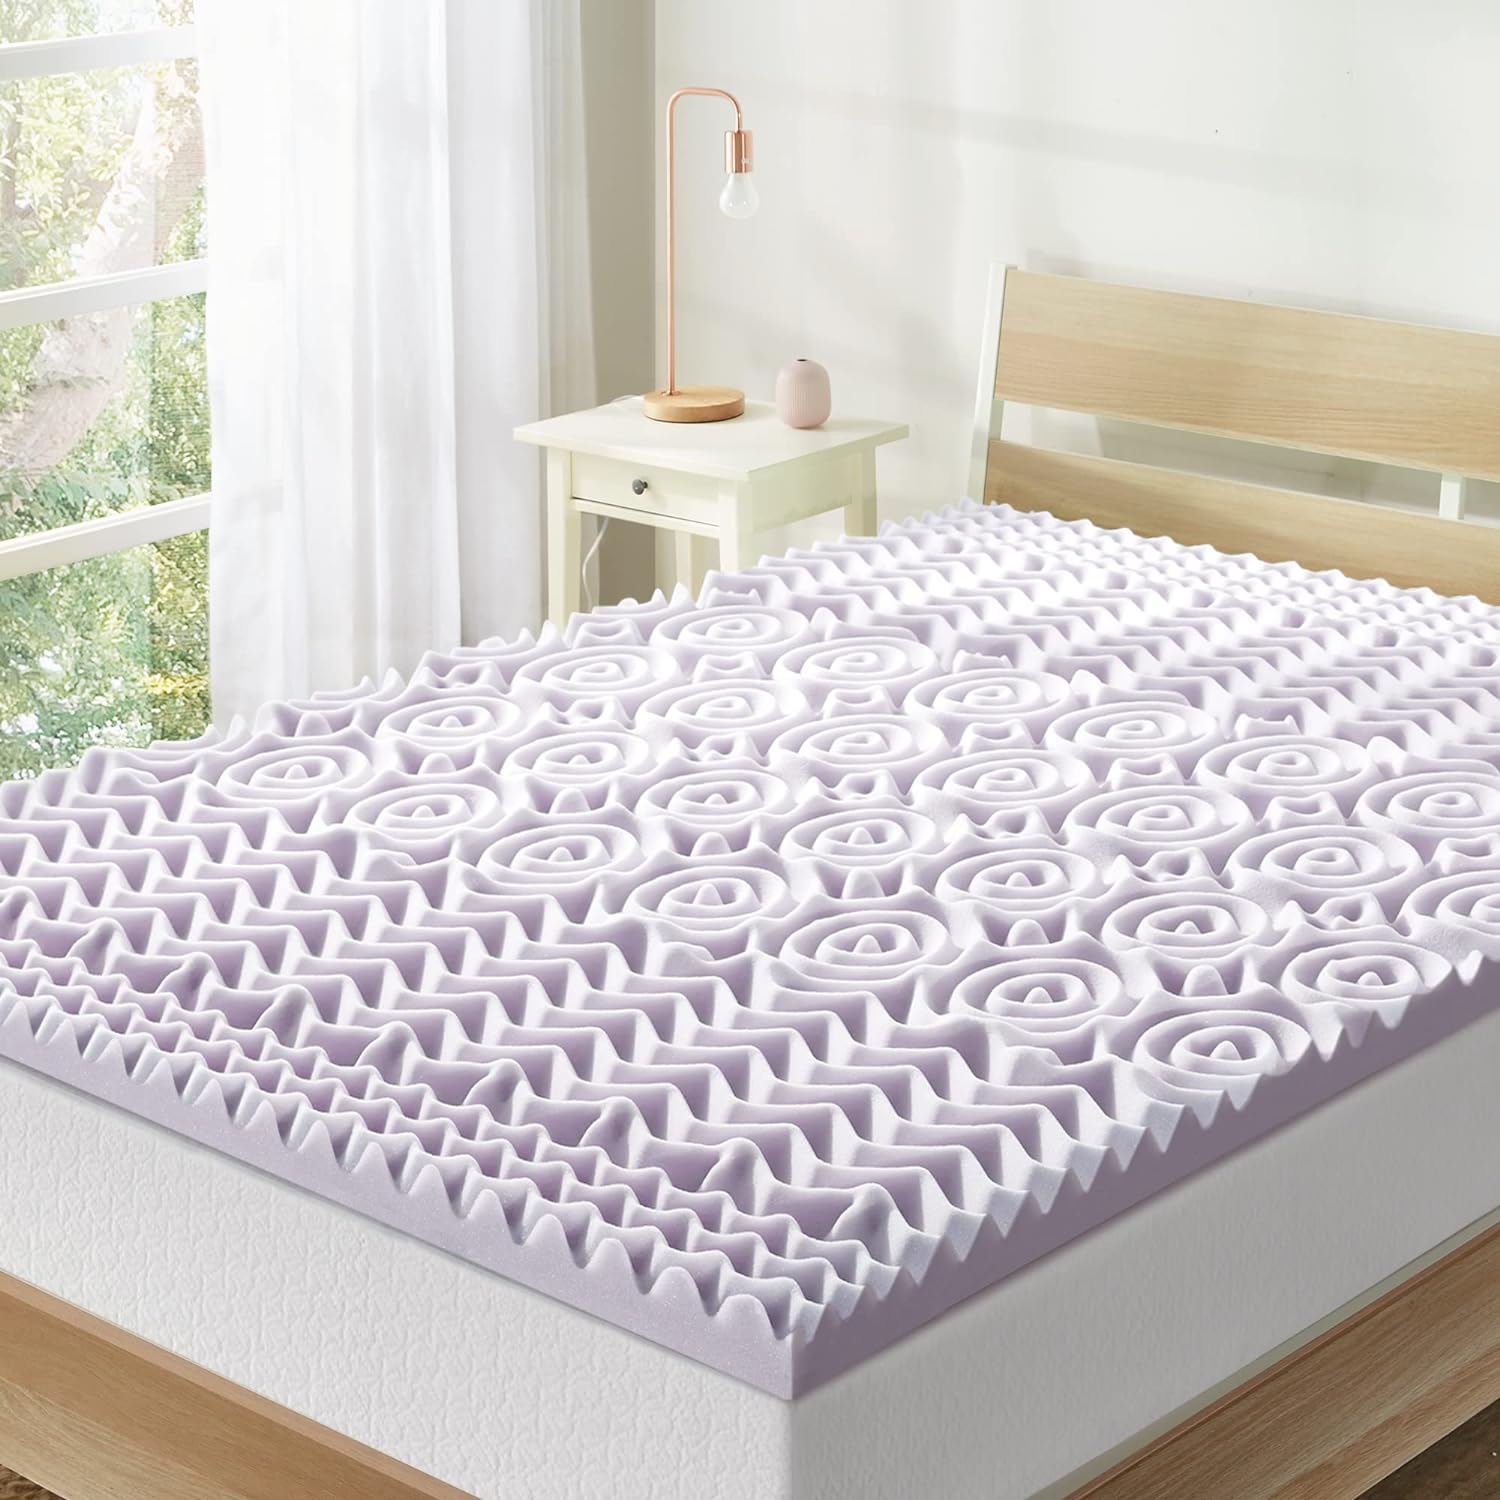 Mellow 2 Inch 5-Zone Memory Foam Mattress Topper, Soothing Lavender Infusion, Full